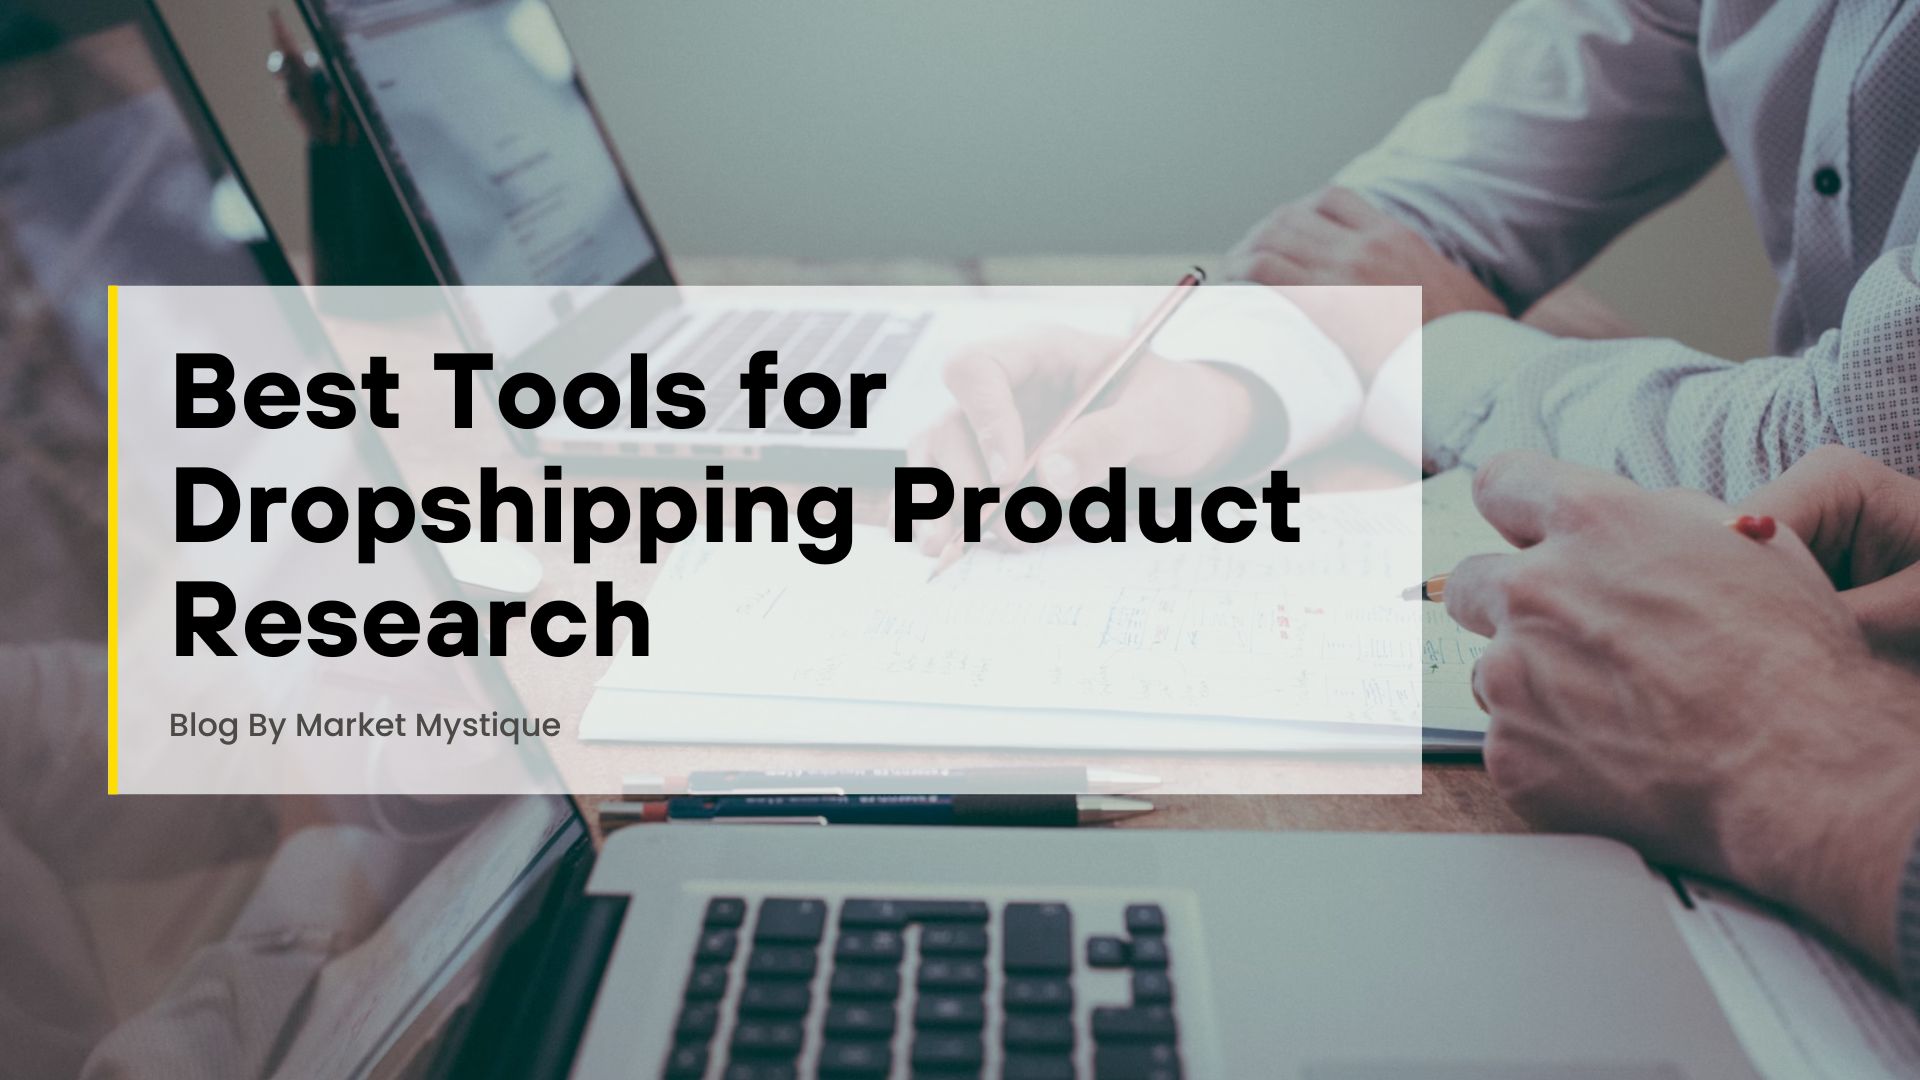 Tools for Dropshipping Product Research